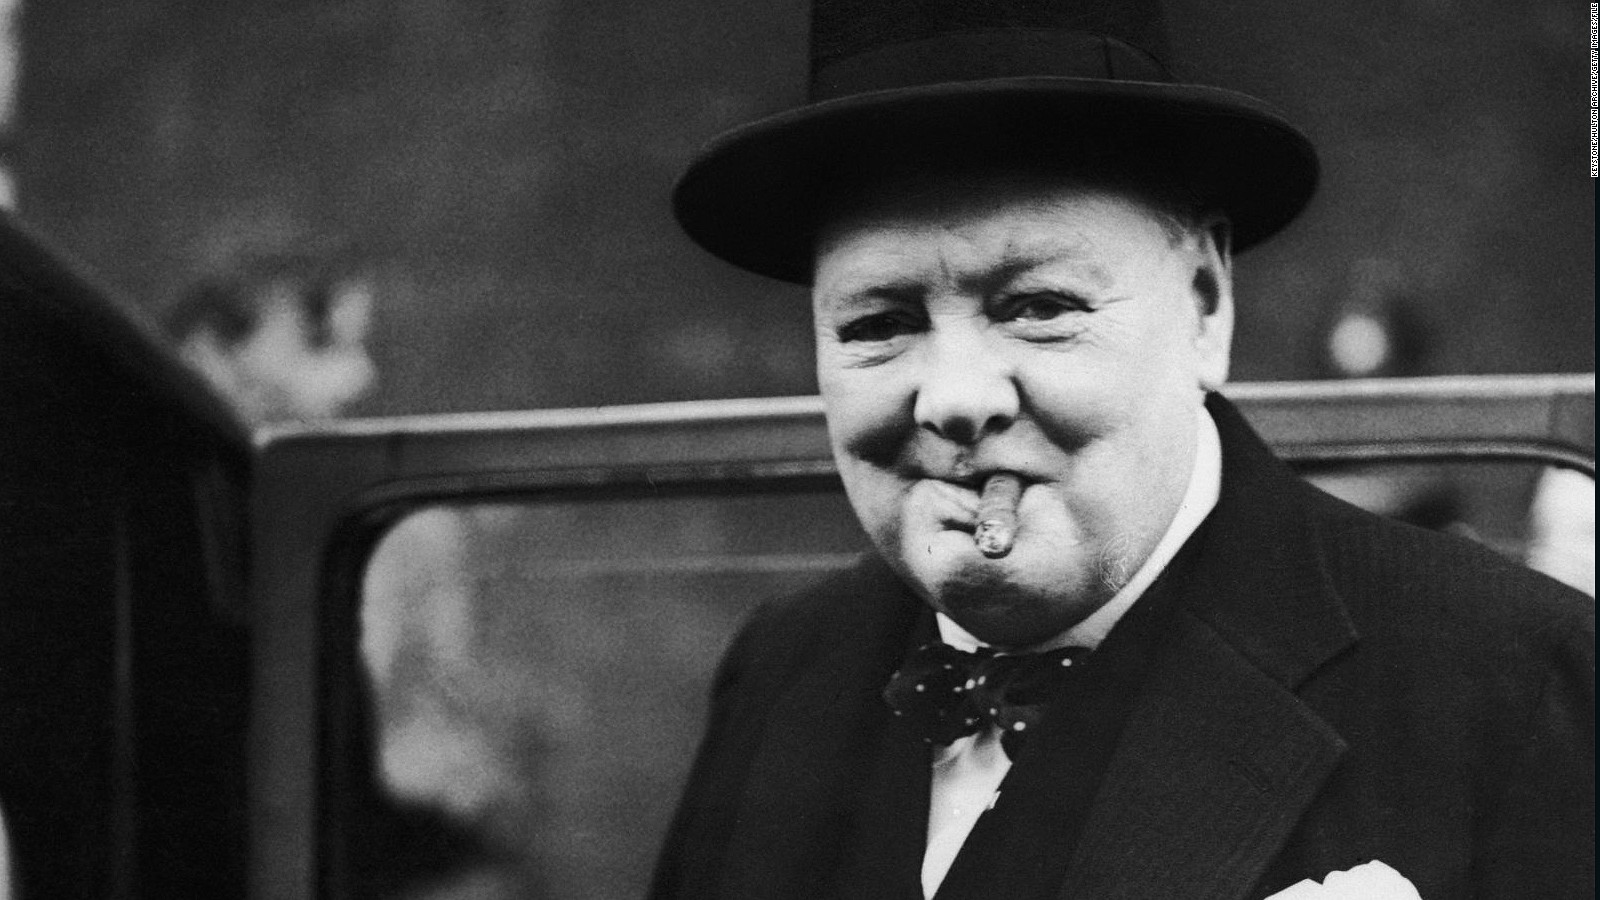 Winston Churchill attractions you can visit in England | CNN Travel